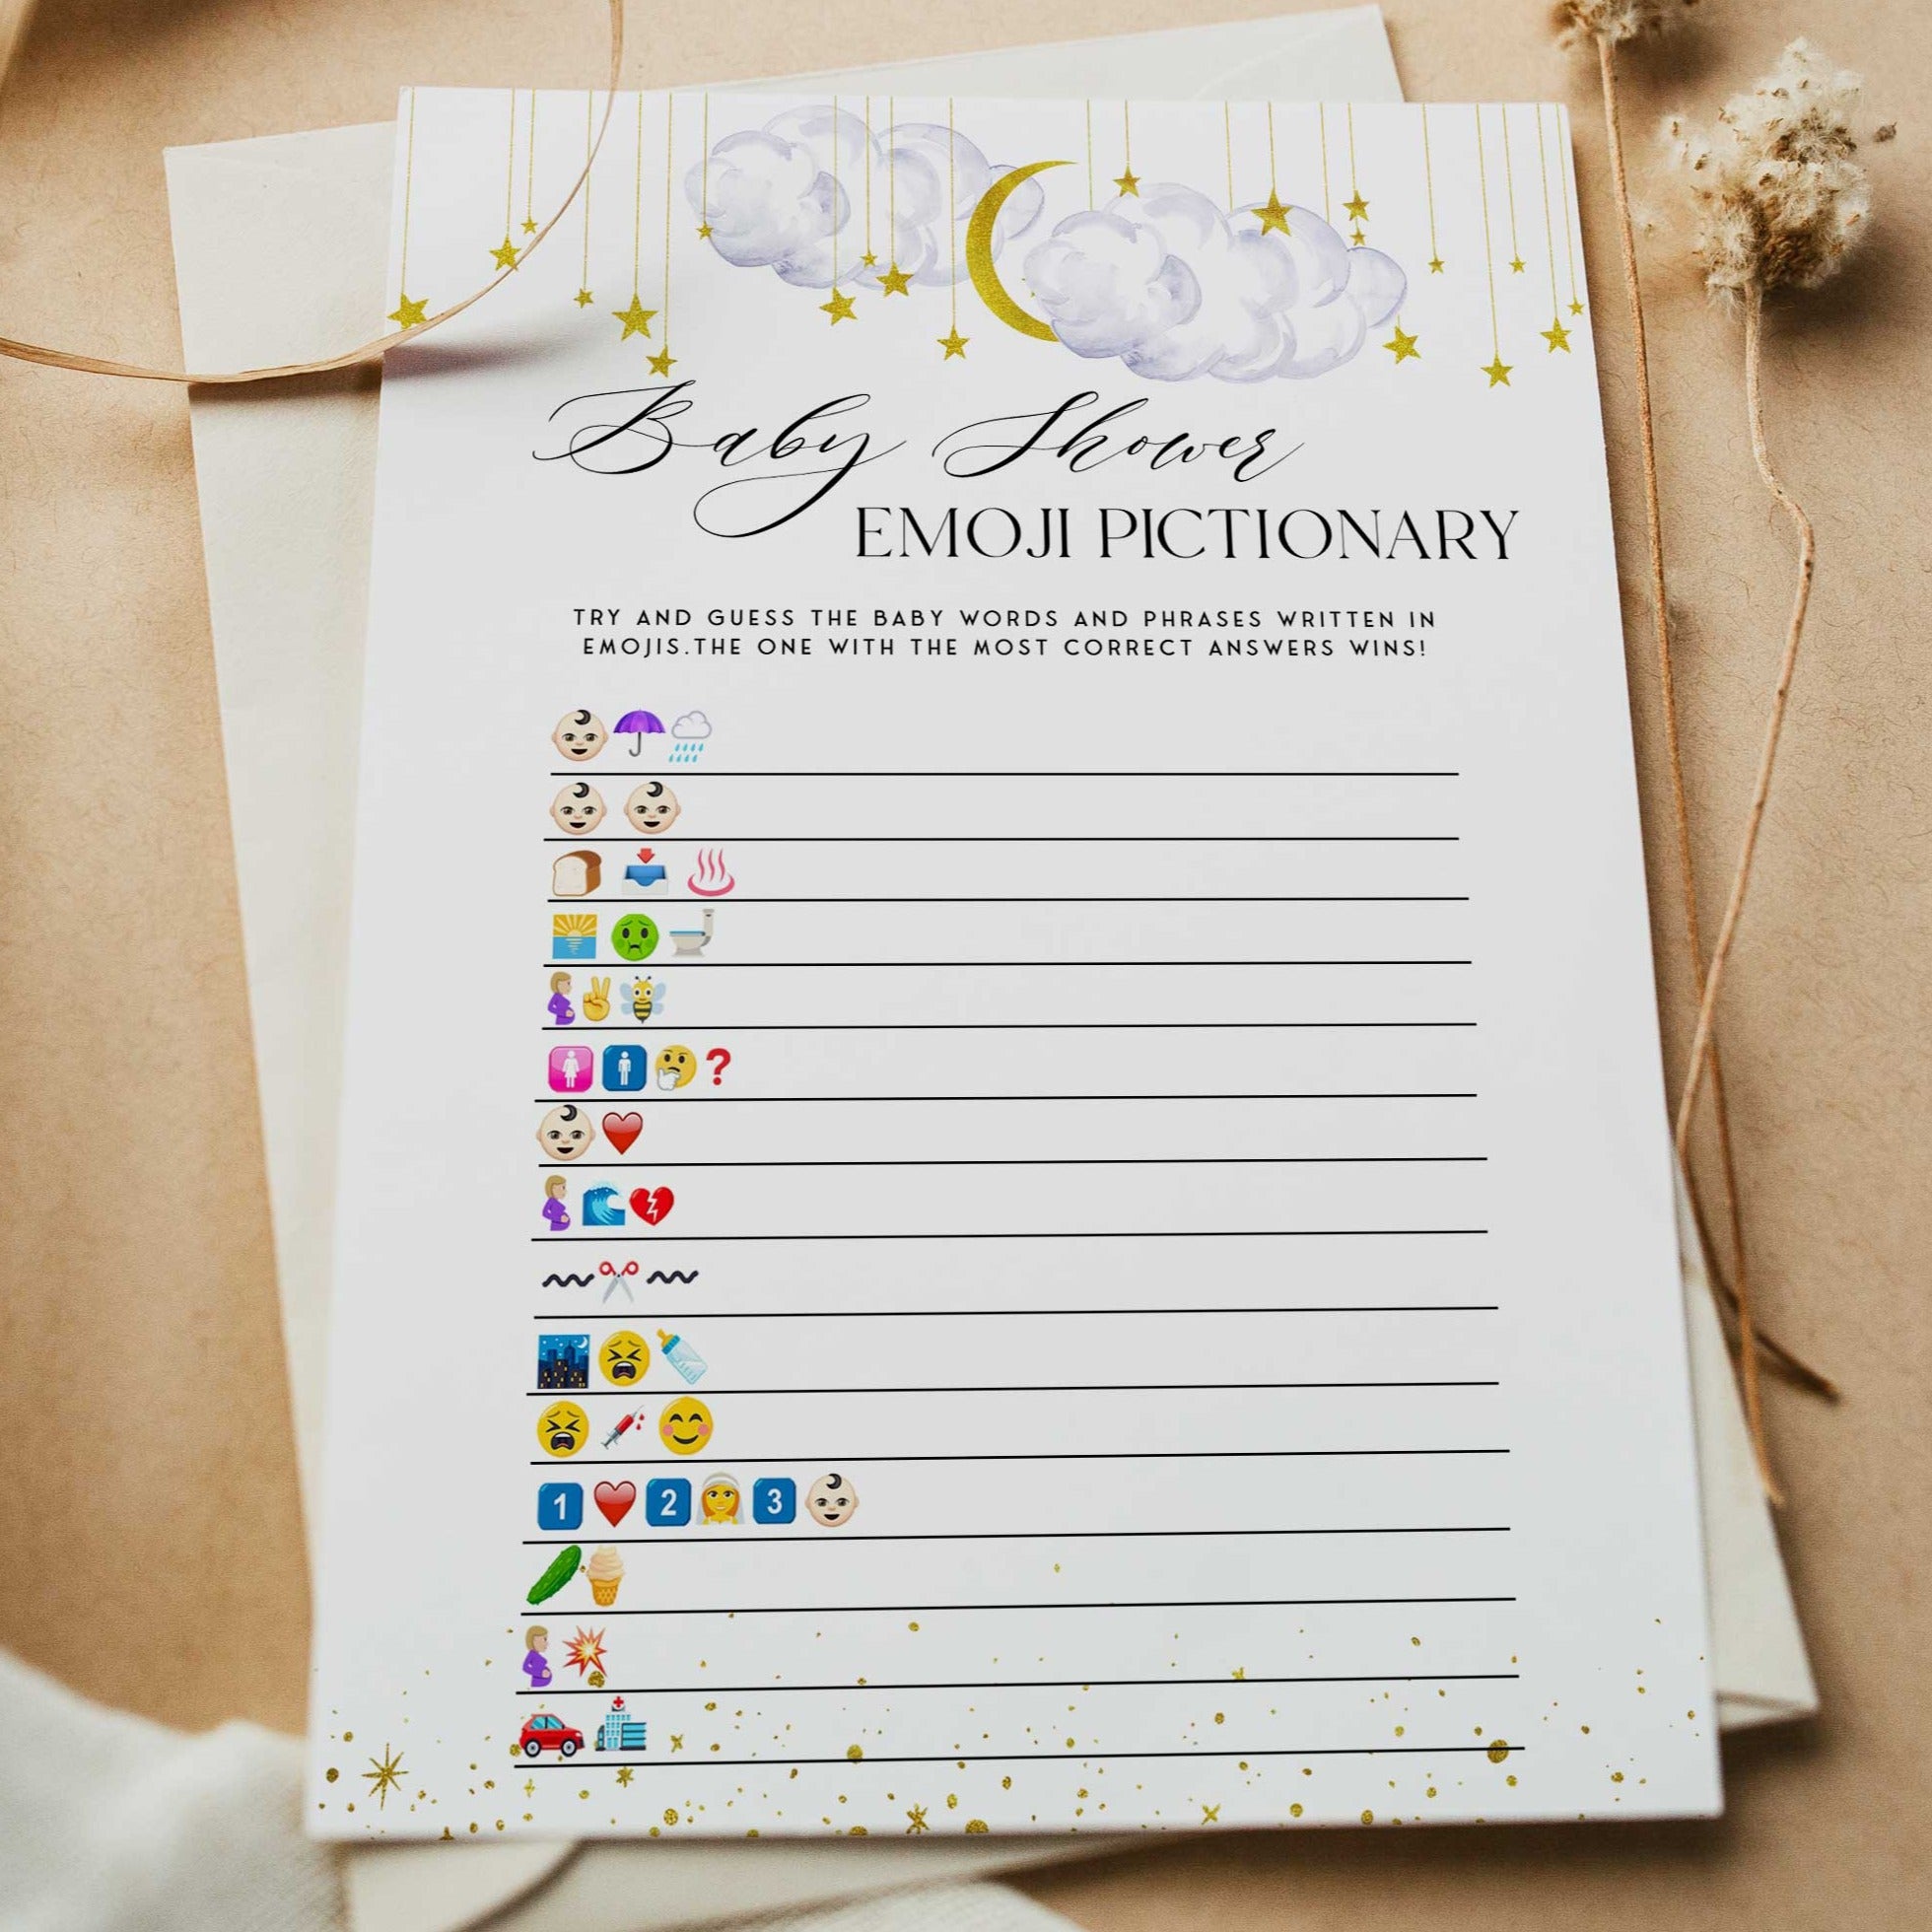 Fully editable and printable baby shower baby shower emoji pictionary game with a little star design. Perfect for a Twinkle Little Star baby shower themed party